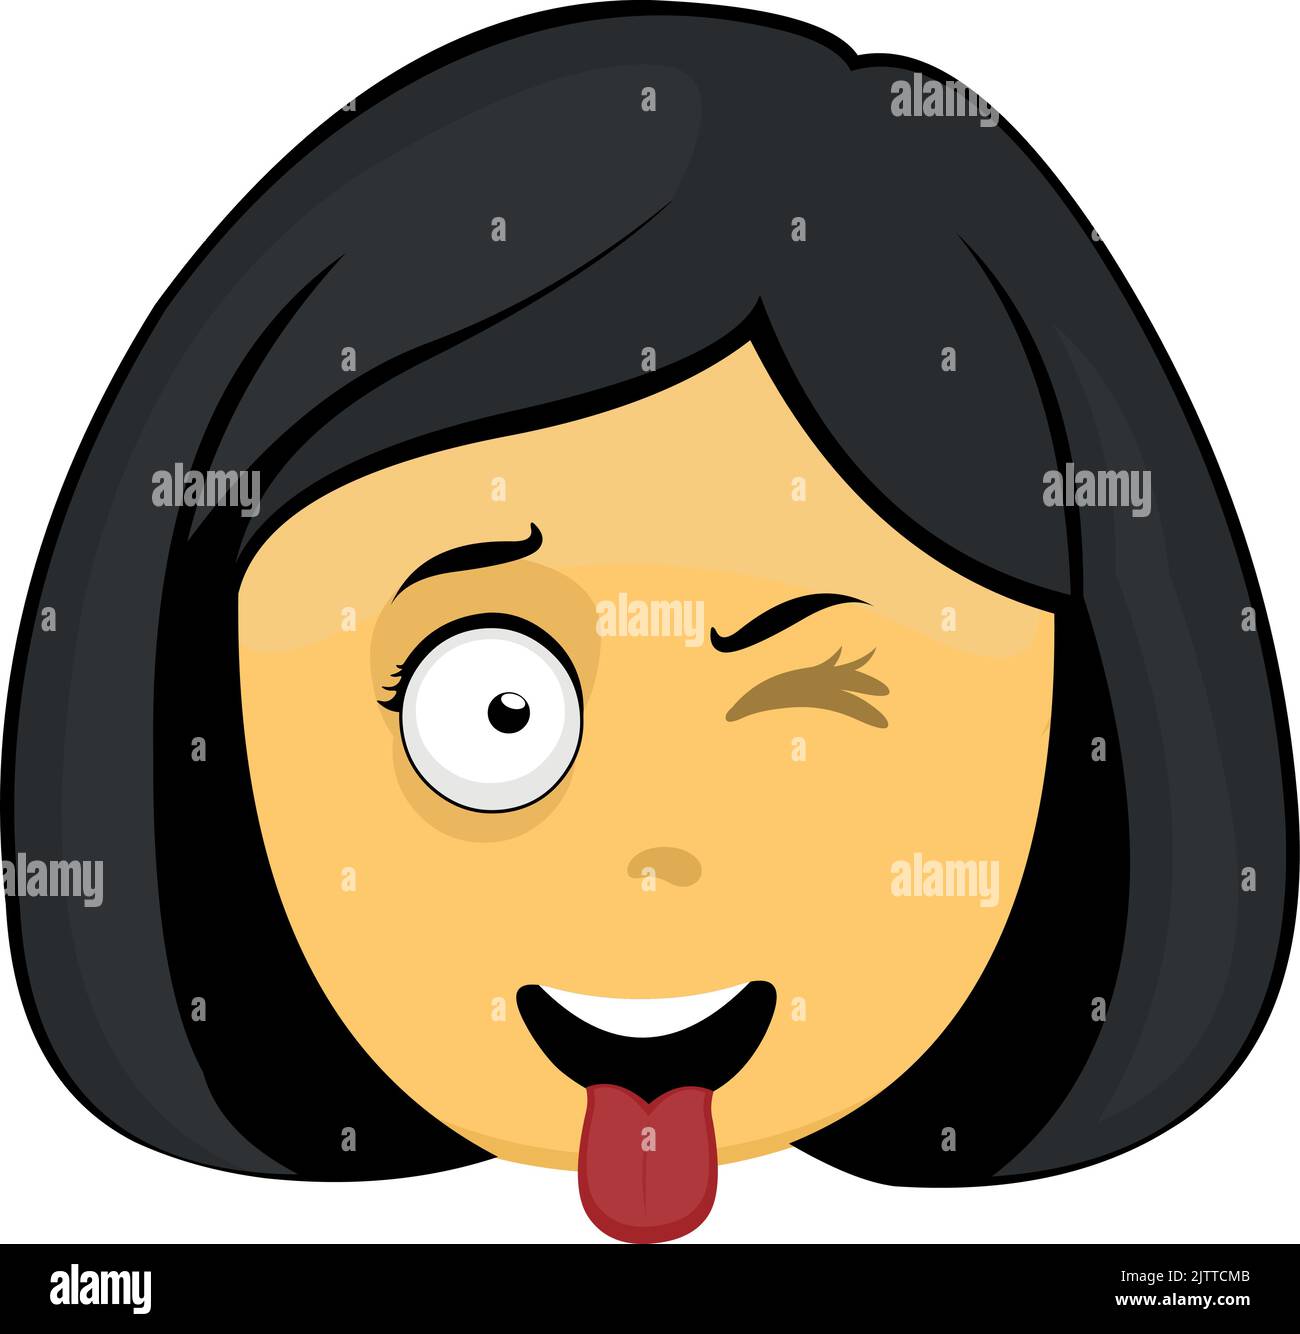 Vector emoji illustration of a yellow cartoon girl face, winking and with her tongue out Stock Vector